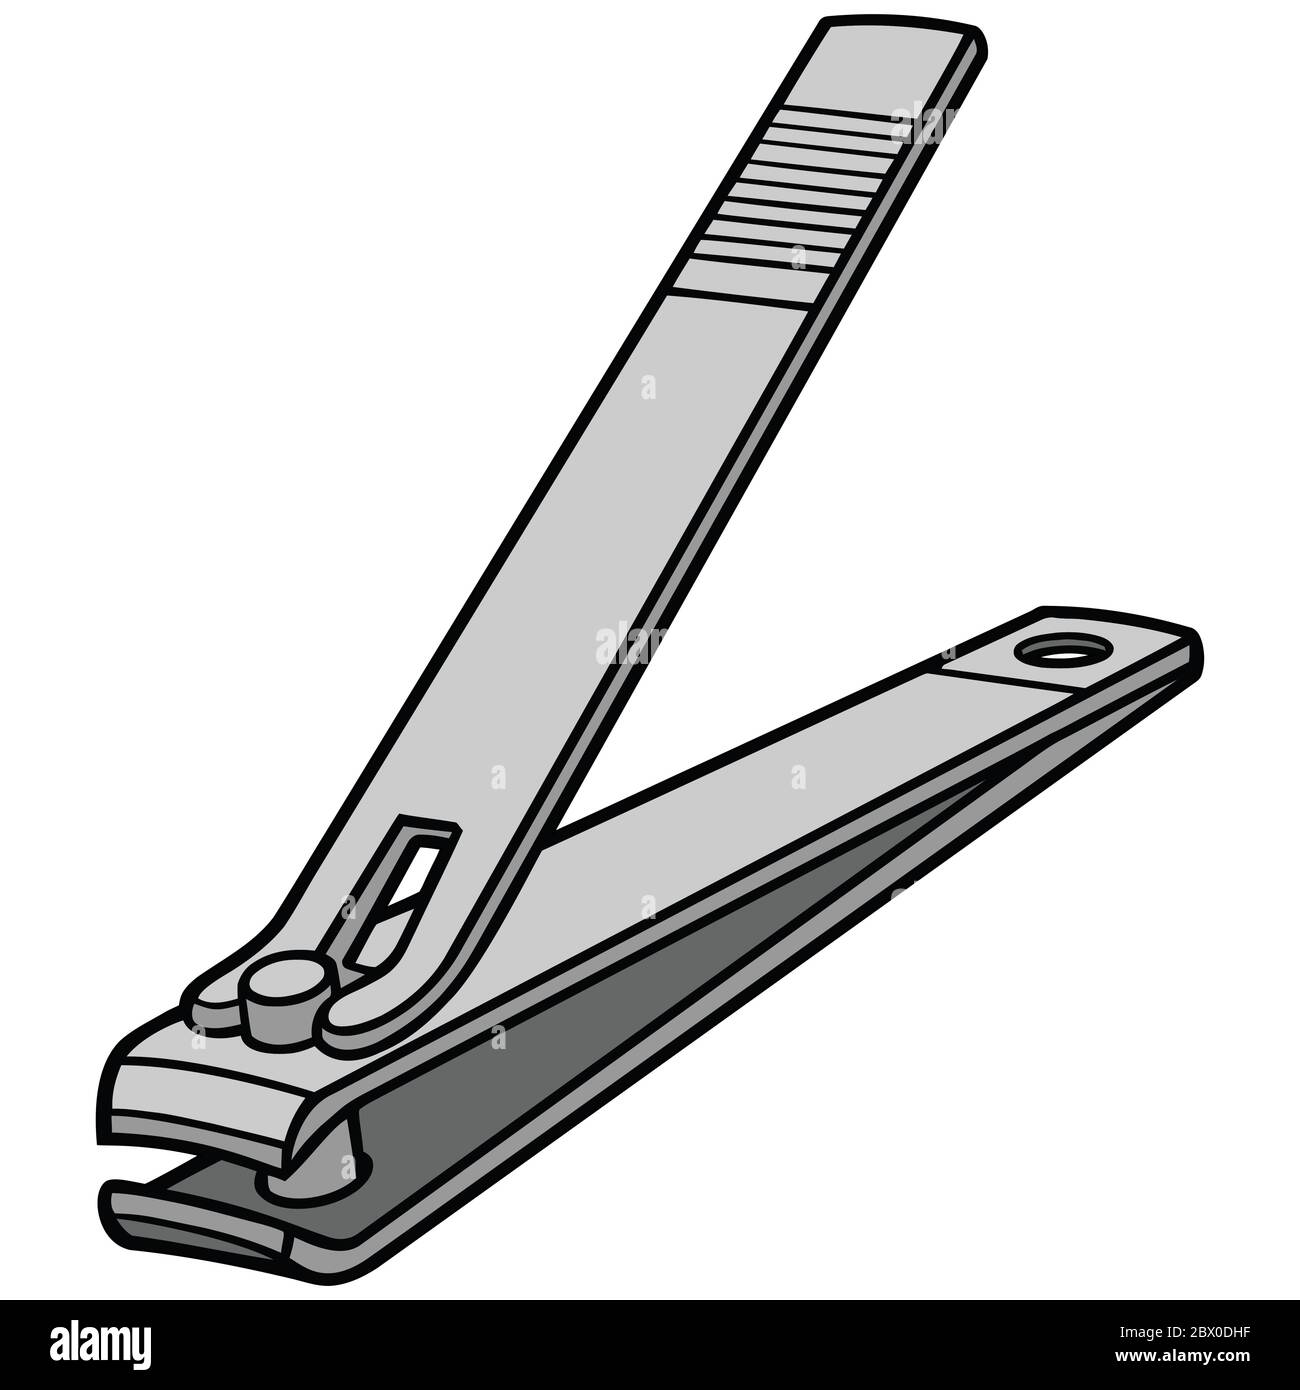 nail cutter clip art black and white